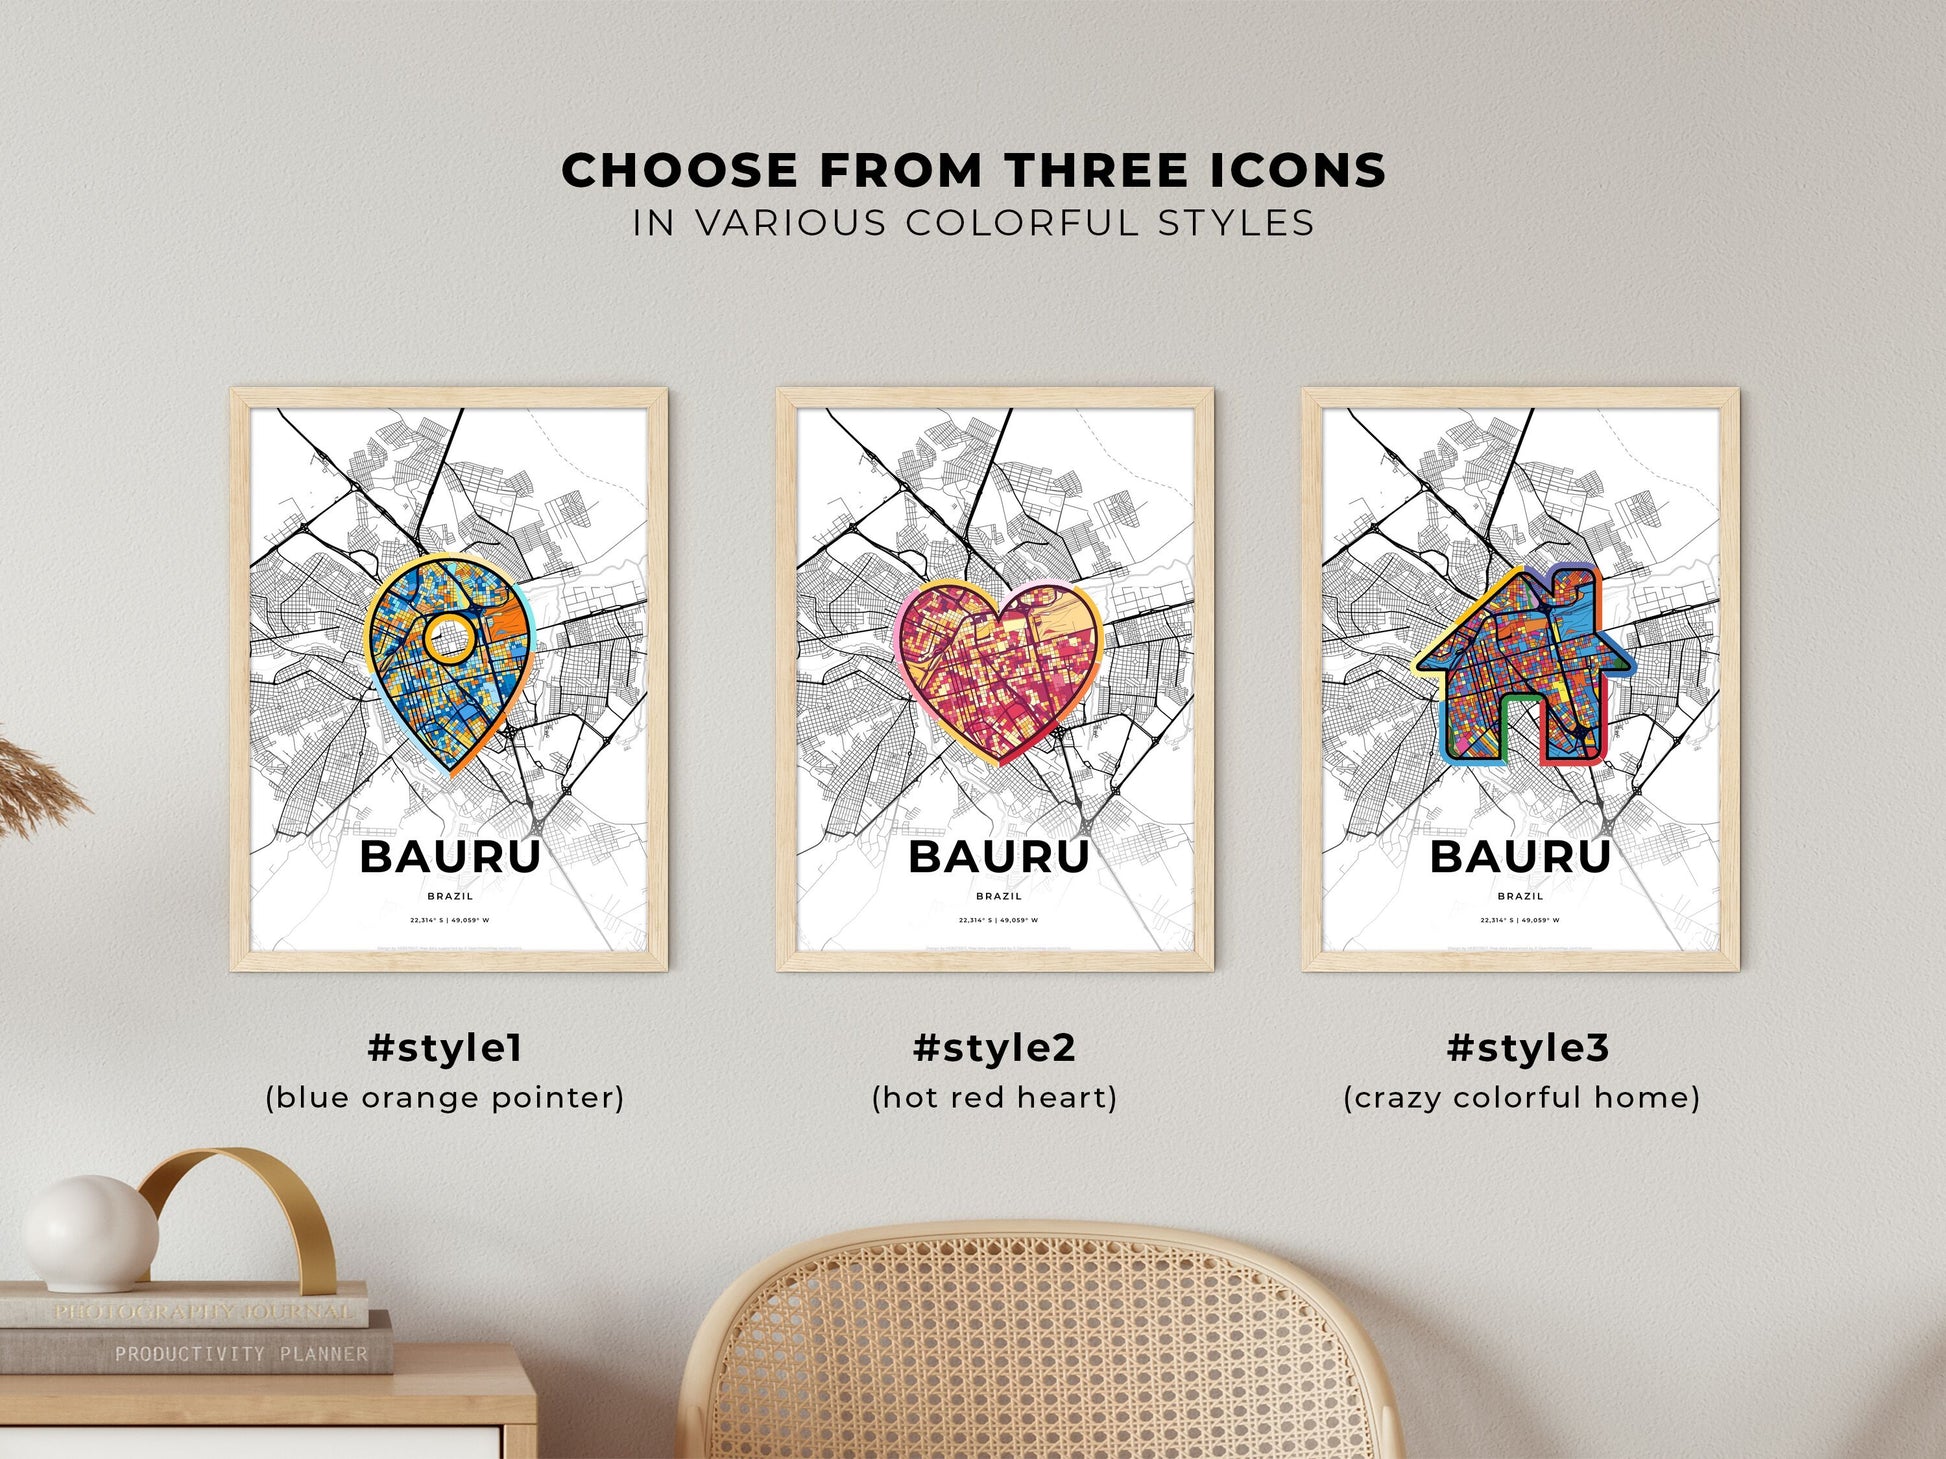 BAURU BRAZIL minimal art map with a colorful icon. Where it all began, Couple map gift.